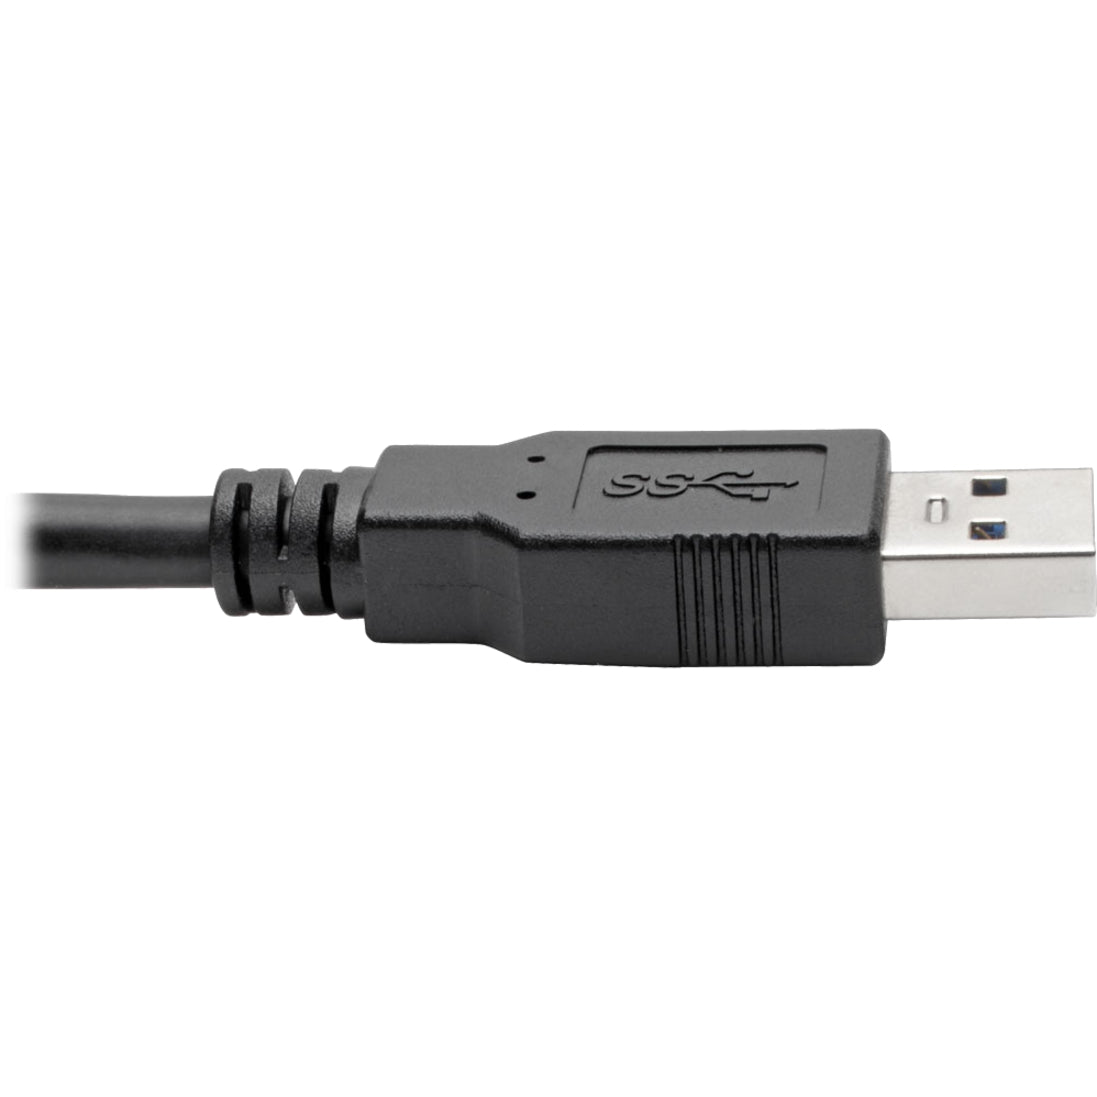 Tripp Lite U325-006 USB 3.0 SuperSpeed A/A Cable, Black, 6 ft., Corrosion Resistant, Flexible, EMI/RF Protection